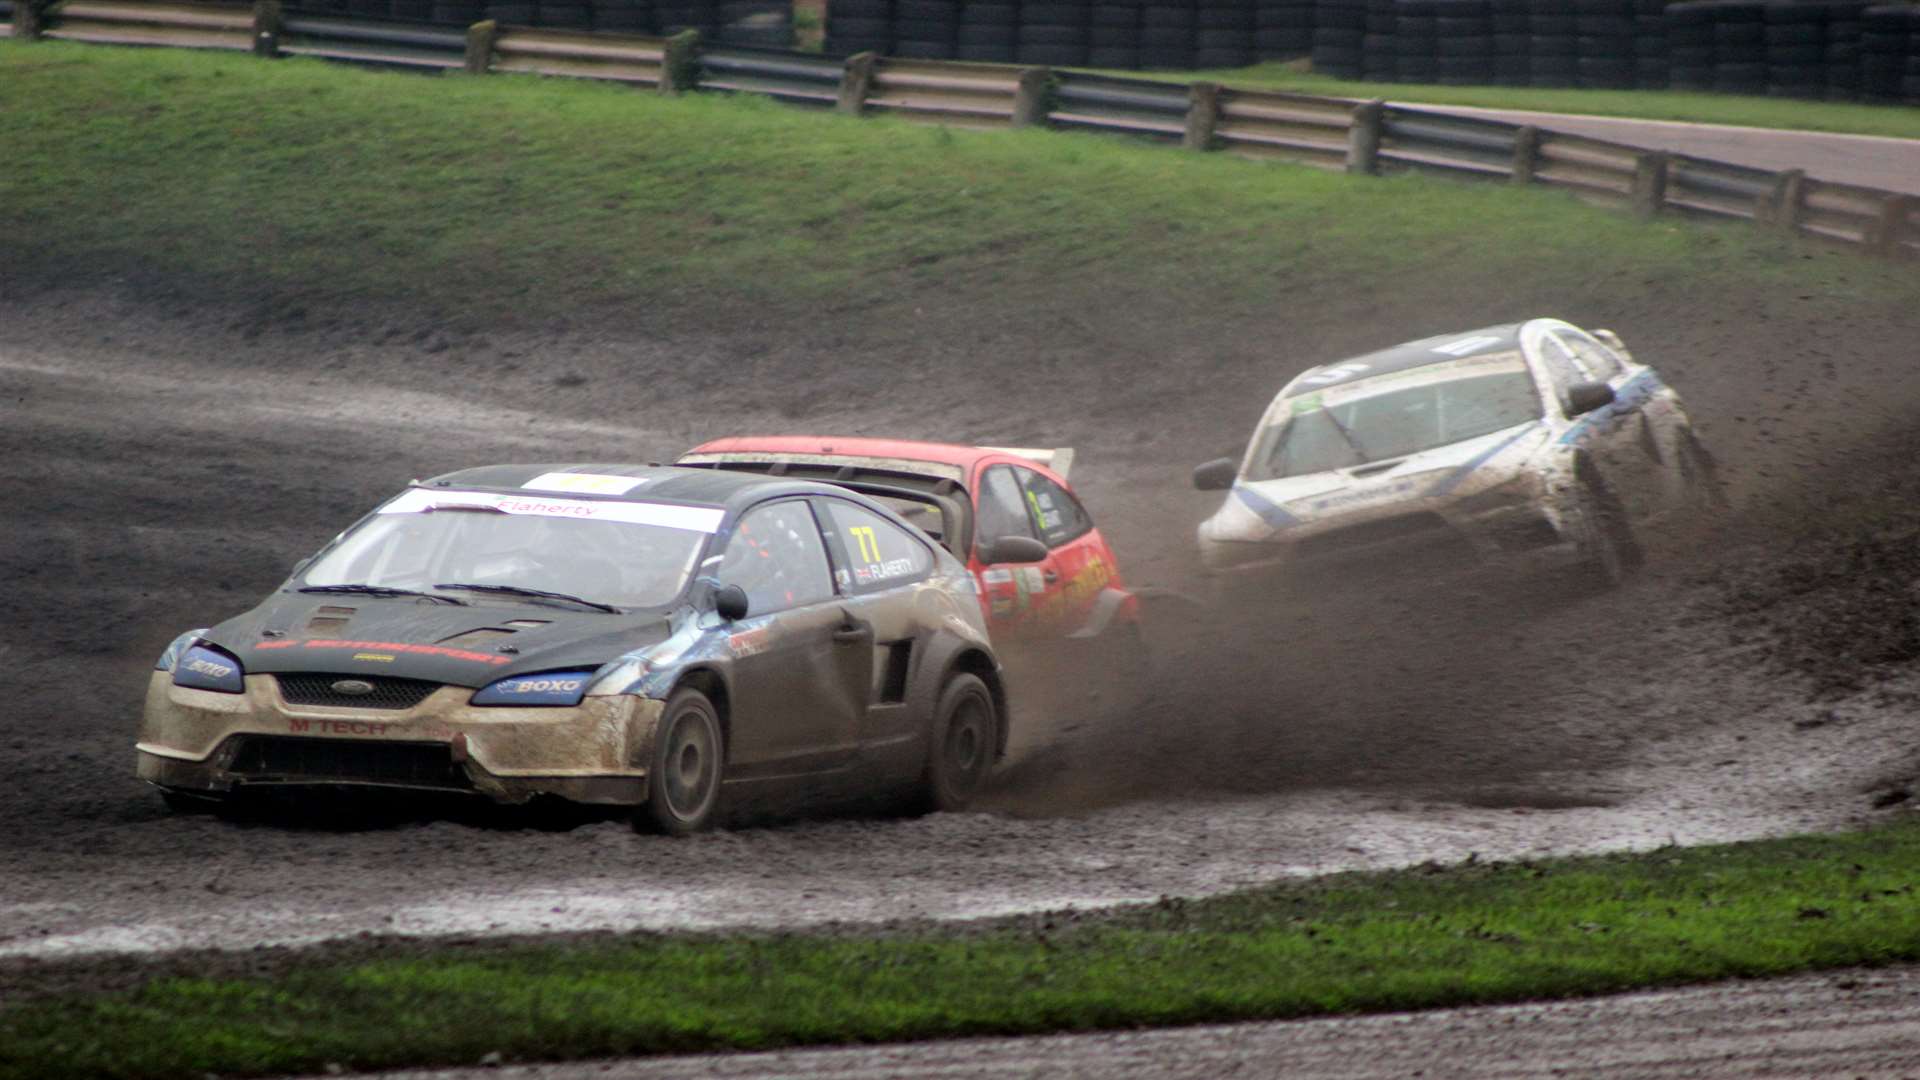 Competitors from the MSA British Rallycross Championship - including Supercar - are set to feature. Picture: Joe Wright